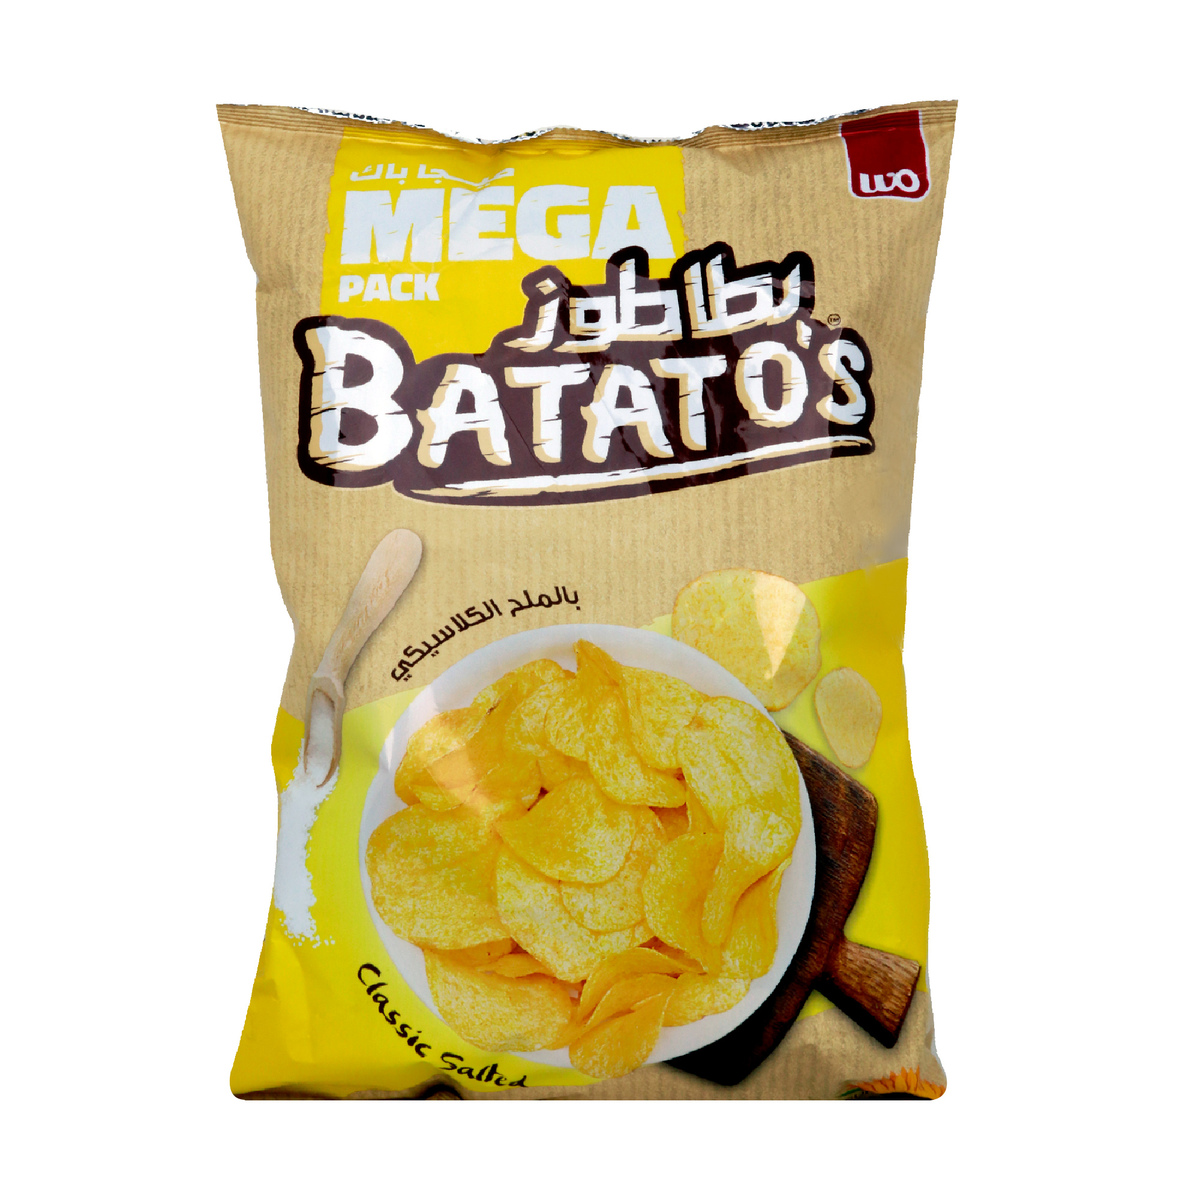 Batato's Chips Classic Salted 167g